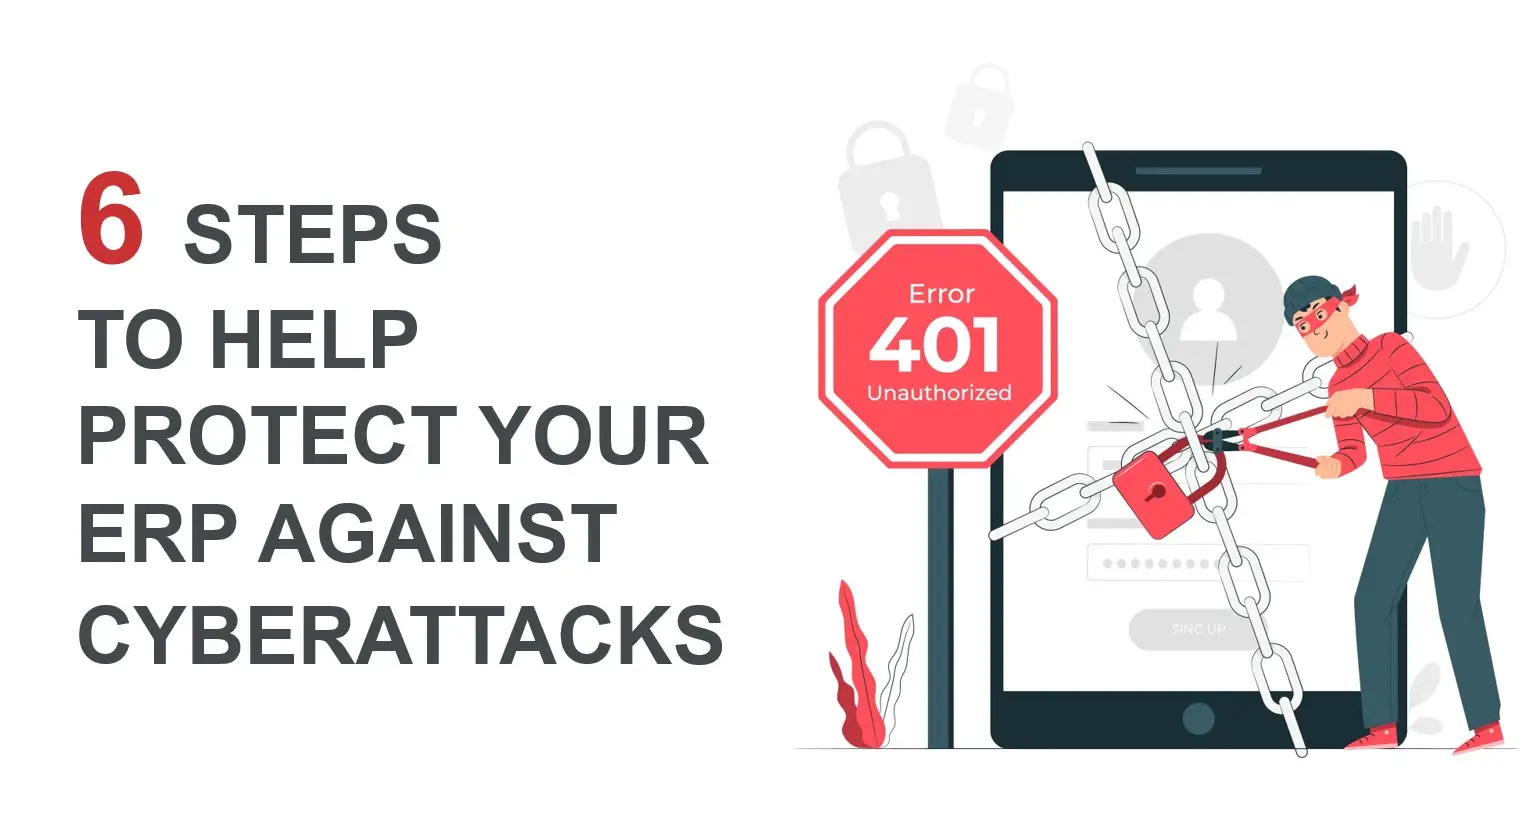 6 Steps To Help Protect Your ERP Against Cyberattacks